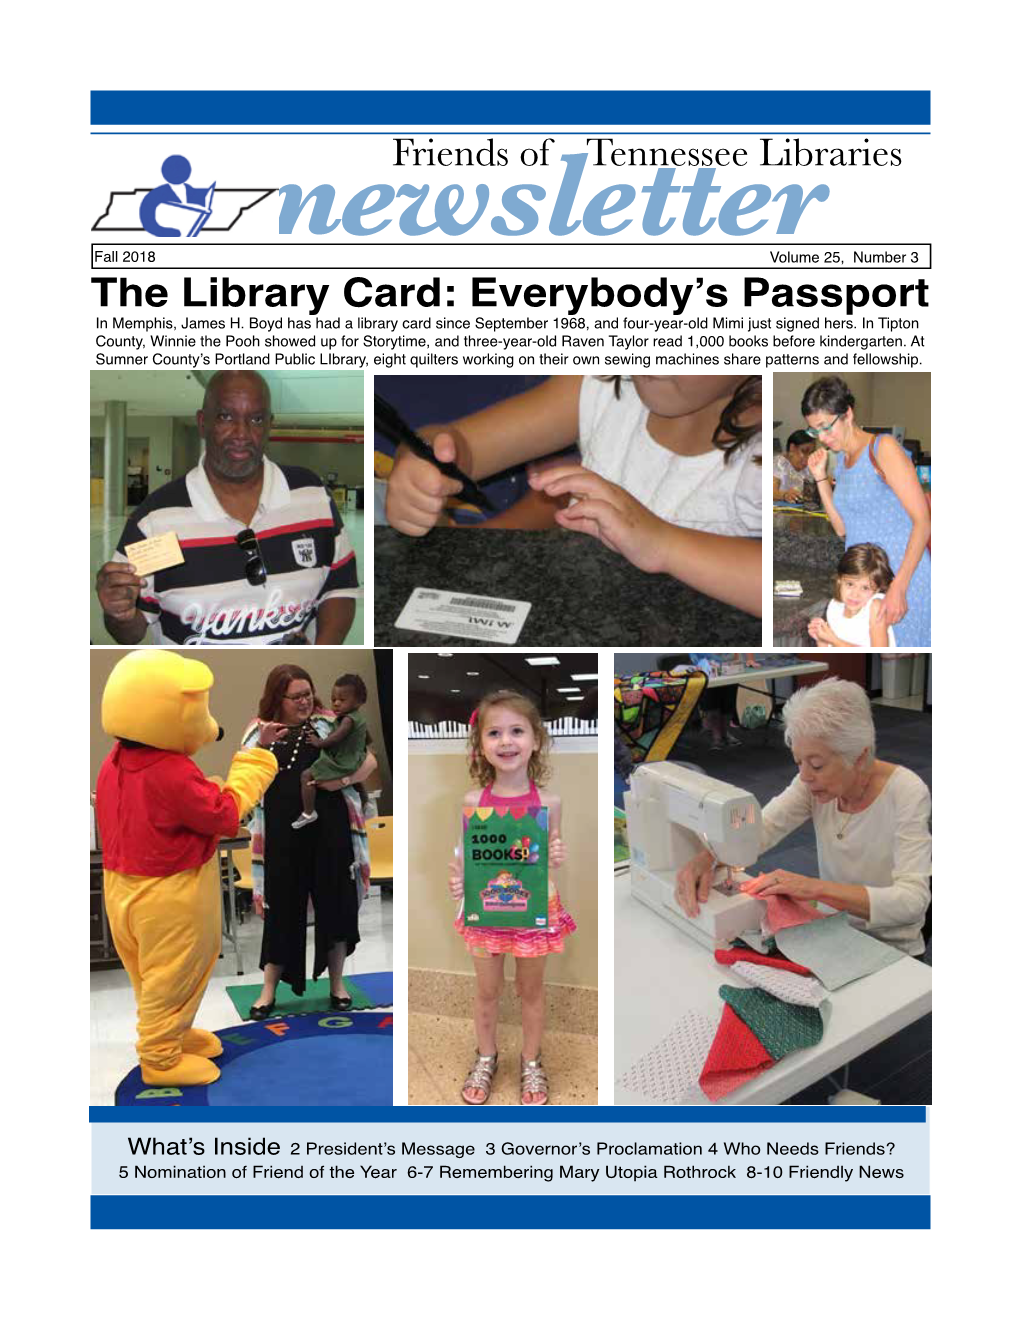 Fall 2018 Newsletter Volume 25, Number 3 the Library Card: Everybody’S Passport in Memphis, James H